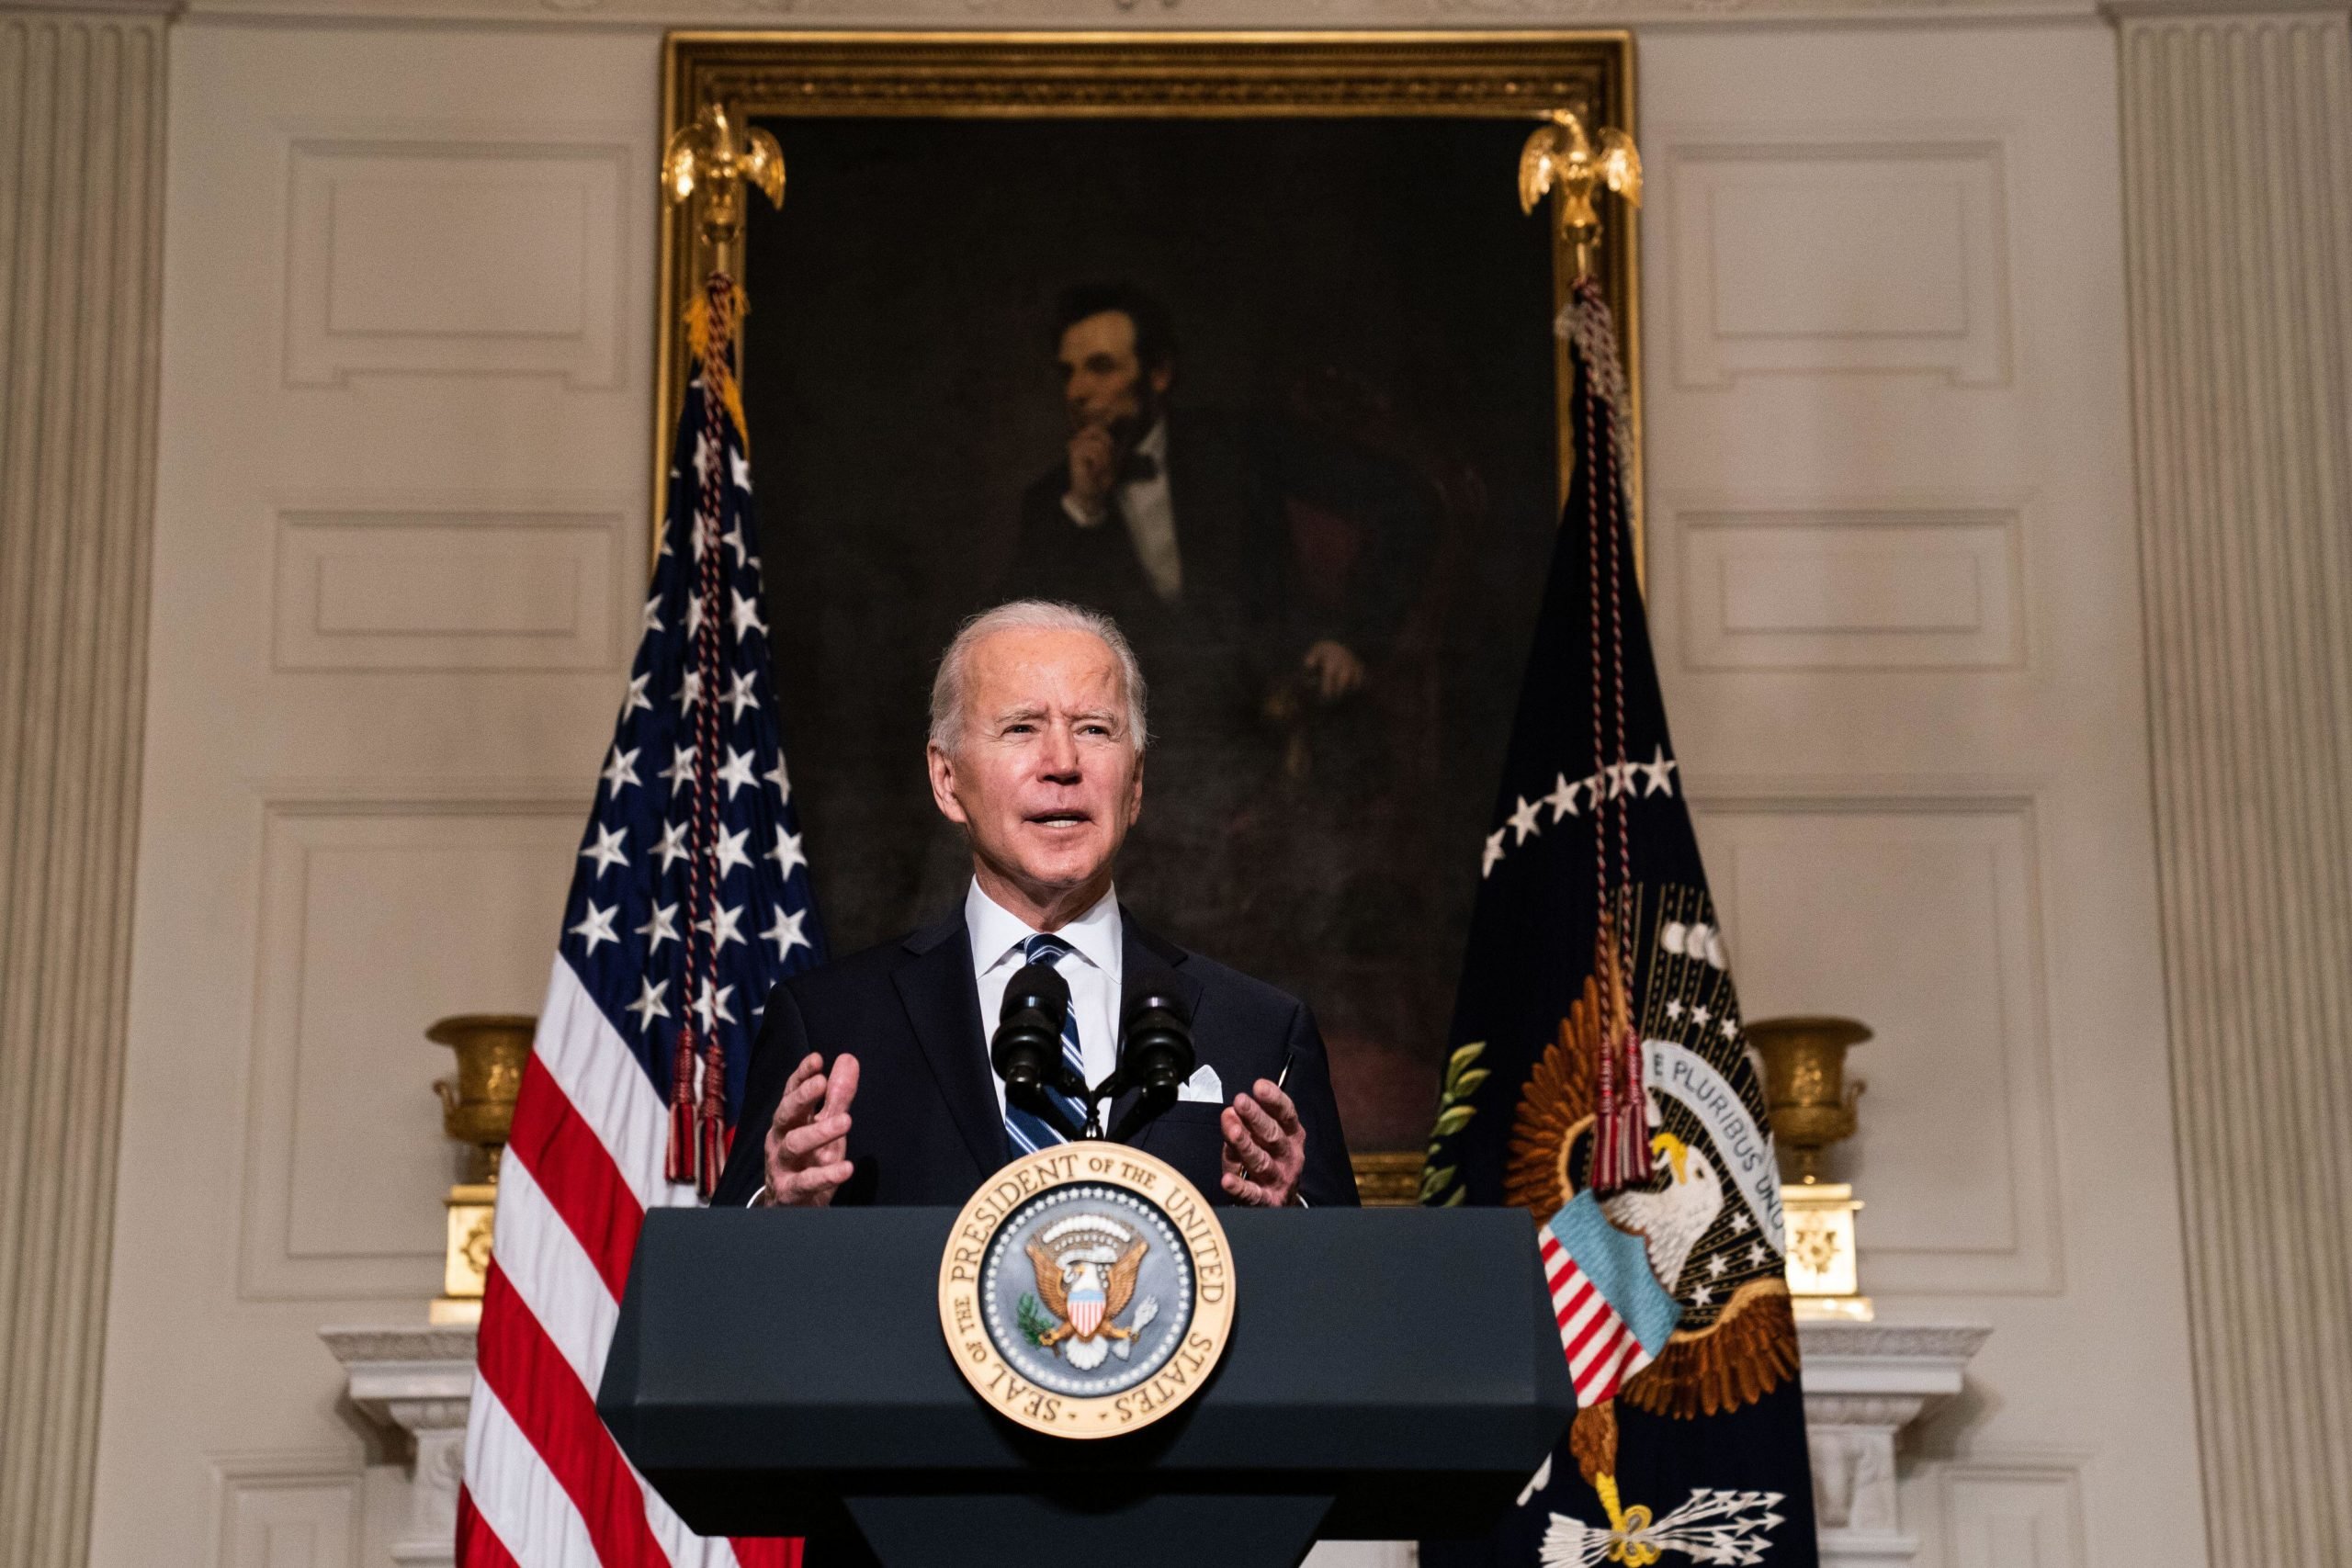 <p>As US President Joe Biden prepares for the Leaders Summit on Climate, developing nations and activists are calling for rich countries to step up climate finance support (Image: UPI/Alamy Live News)</p>